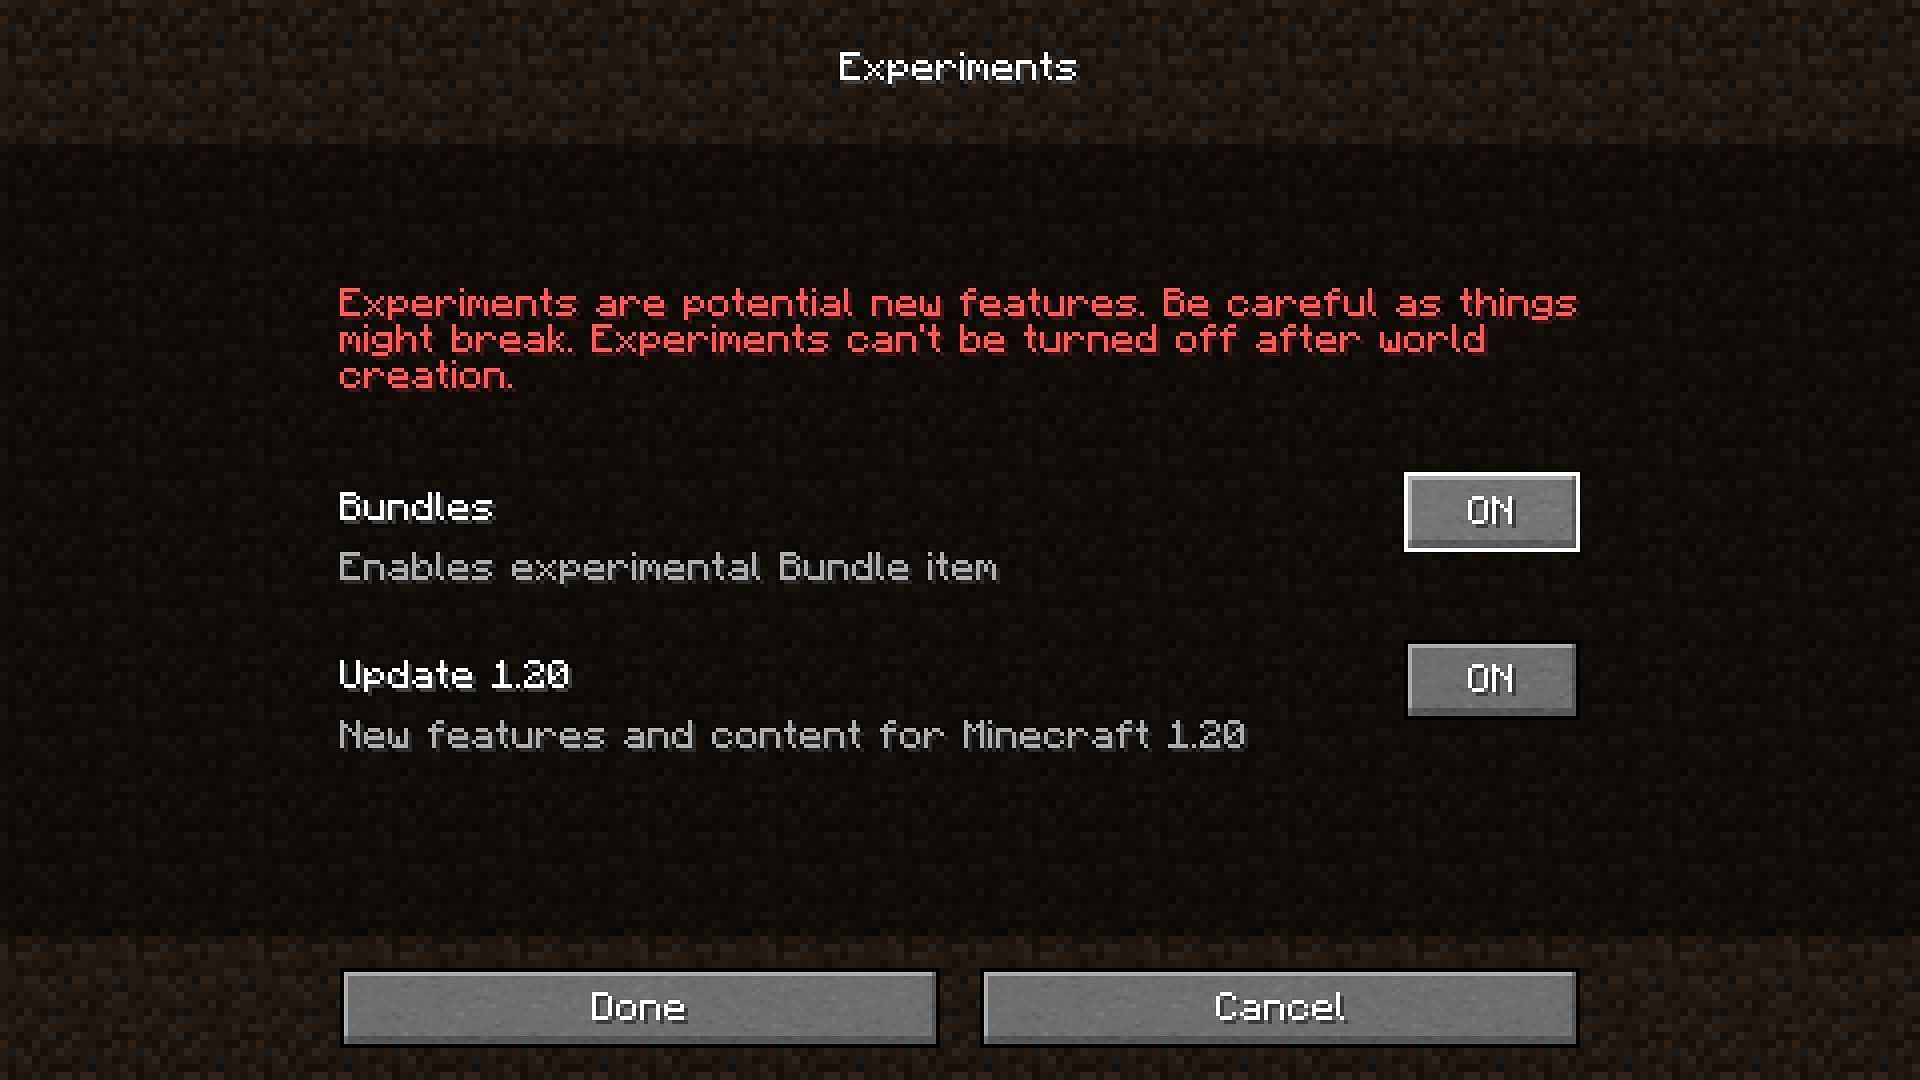 minecraft disable experimental settings warning